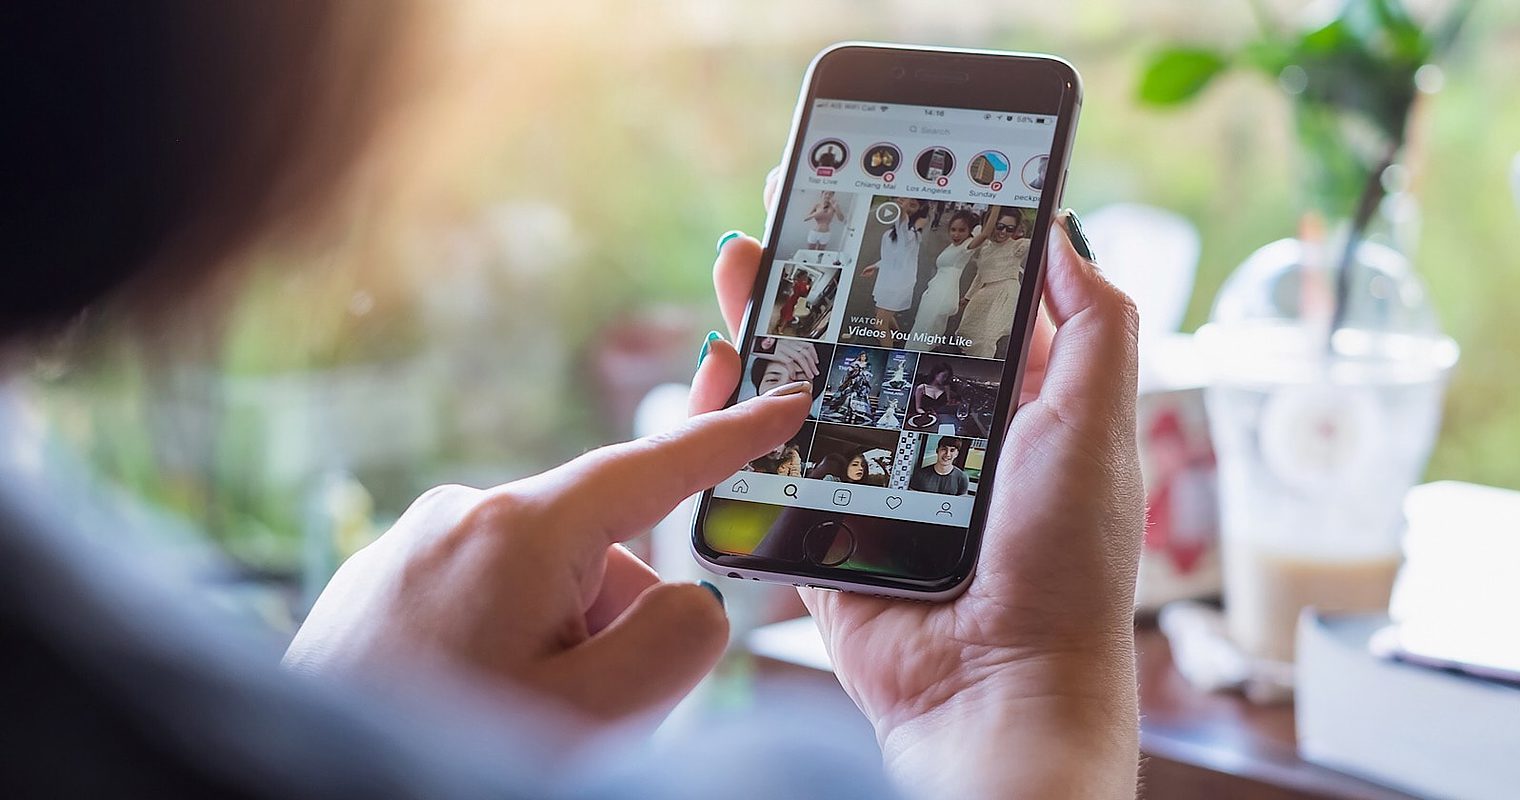 Instagram Decides Not to Alert Users When Screenshots Are Taken